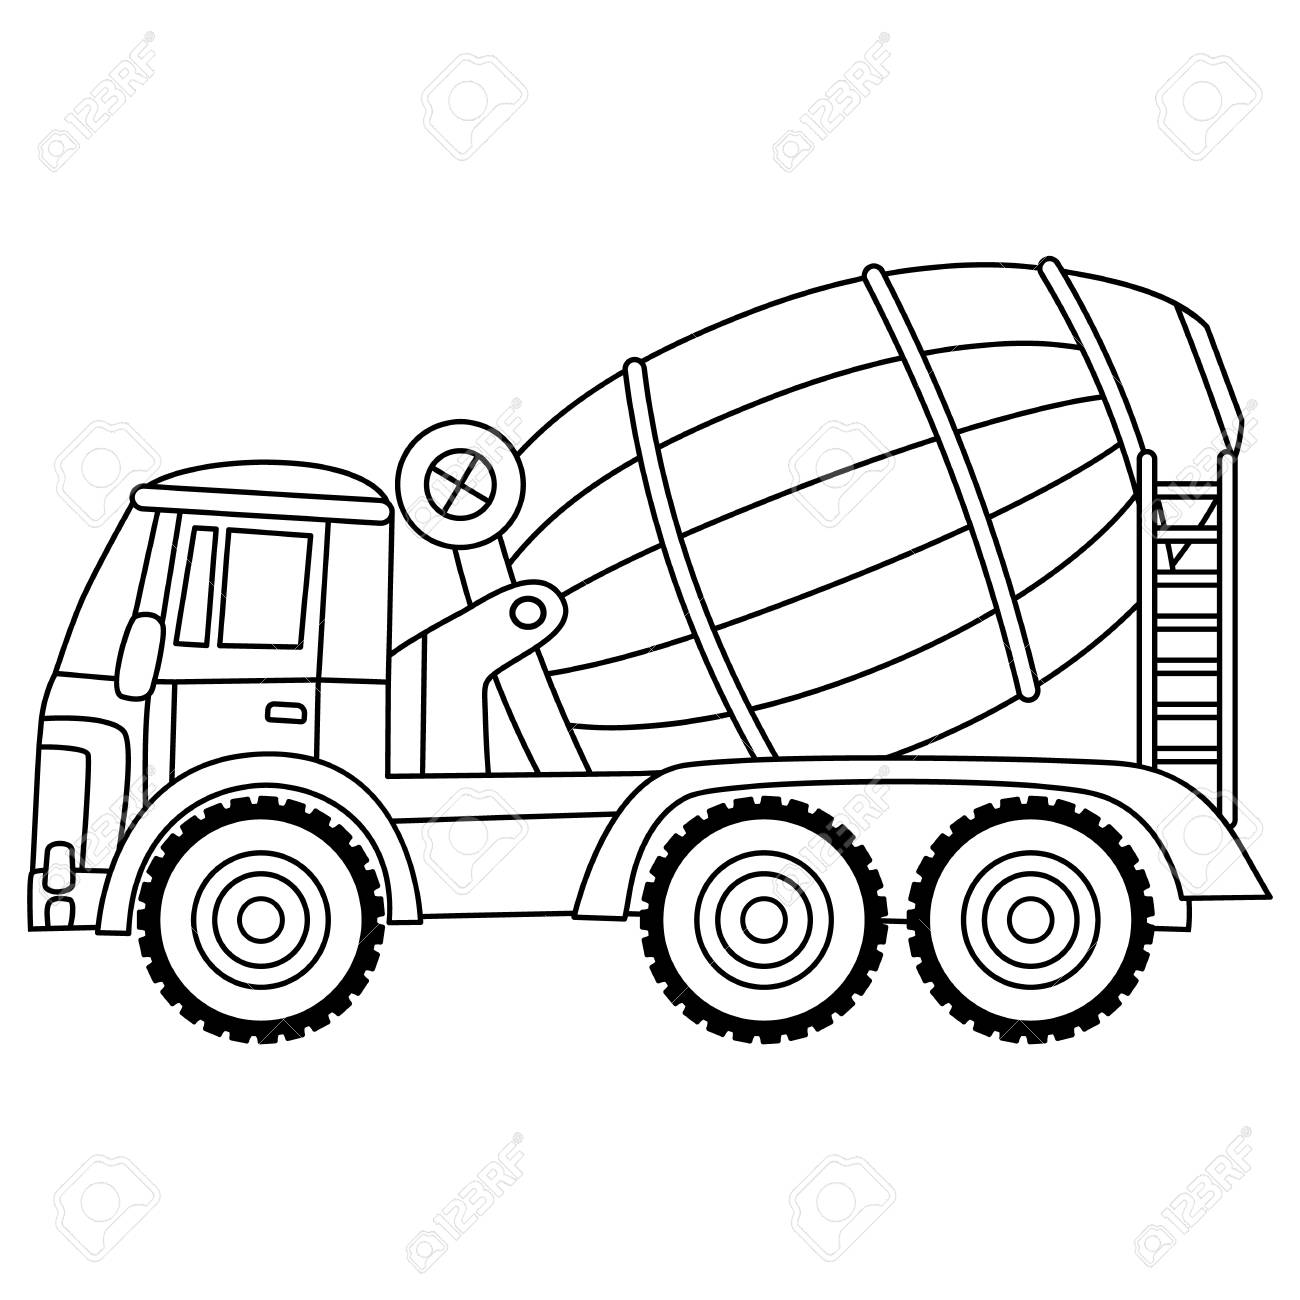 Construction truck clipart black and white